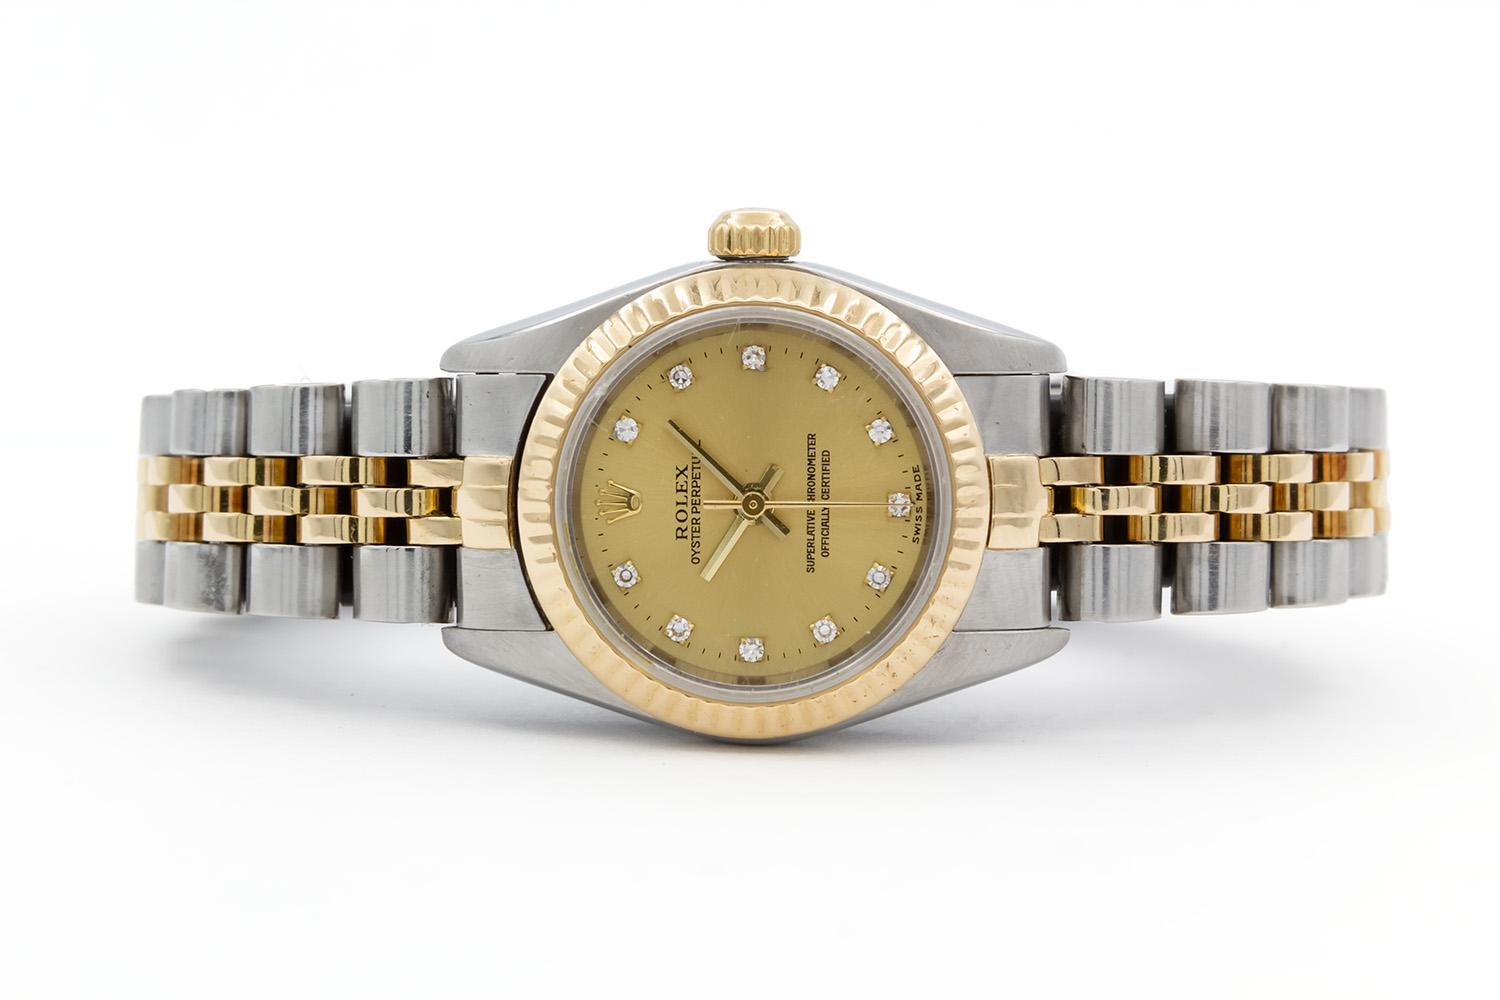 We are pleased to offer this 1999 Rolex Ladies Two Tone Oyster Perpetual 76193. This is a beautiful ladies watch, timeless in its design. It features a 24mm stainless steel case, 18k yellow gold fluted bezel, champagne diamond dial and two tone